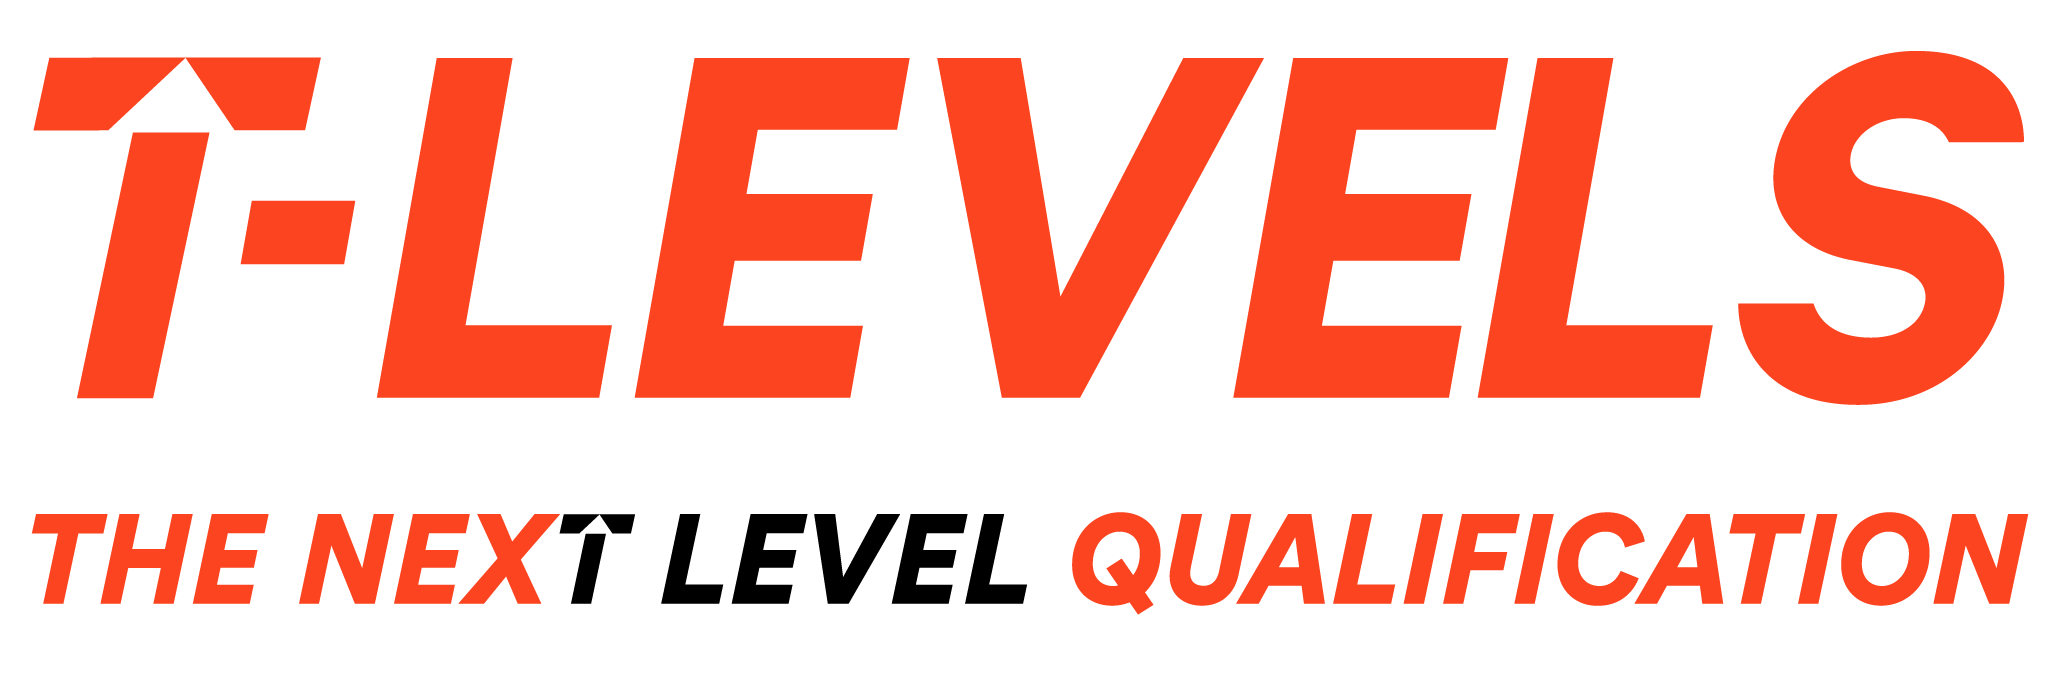 T-Level logo - the next level qualifications 